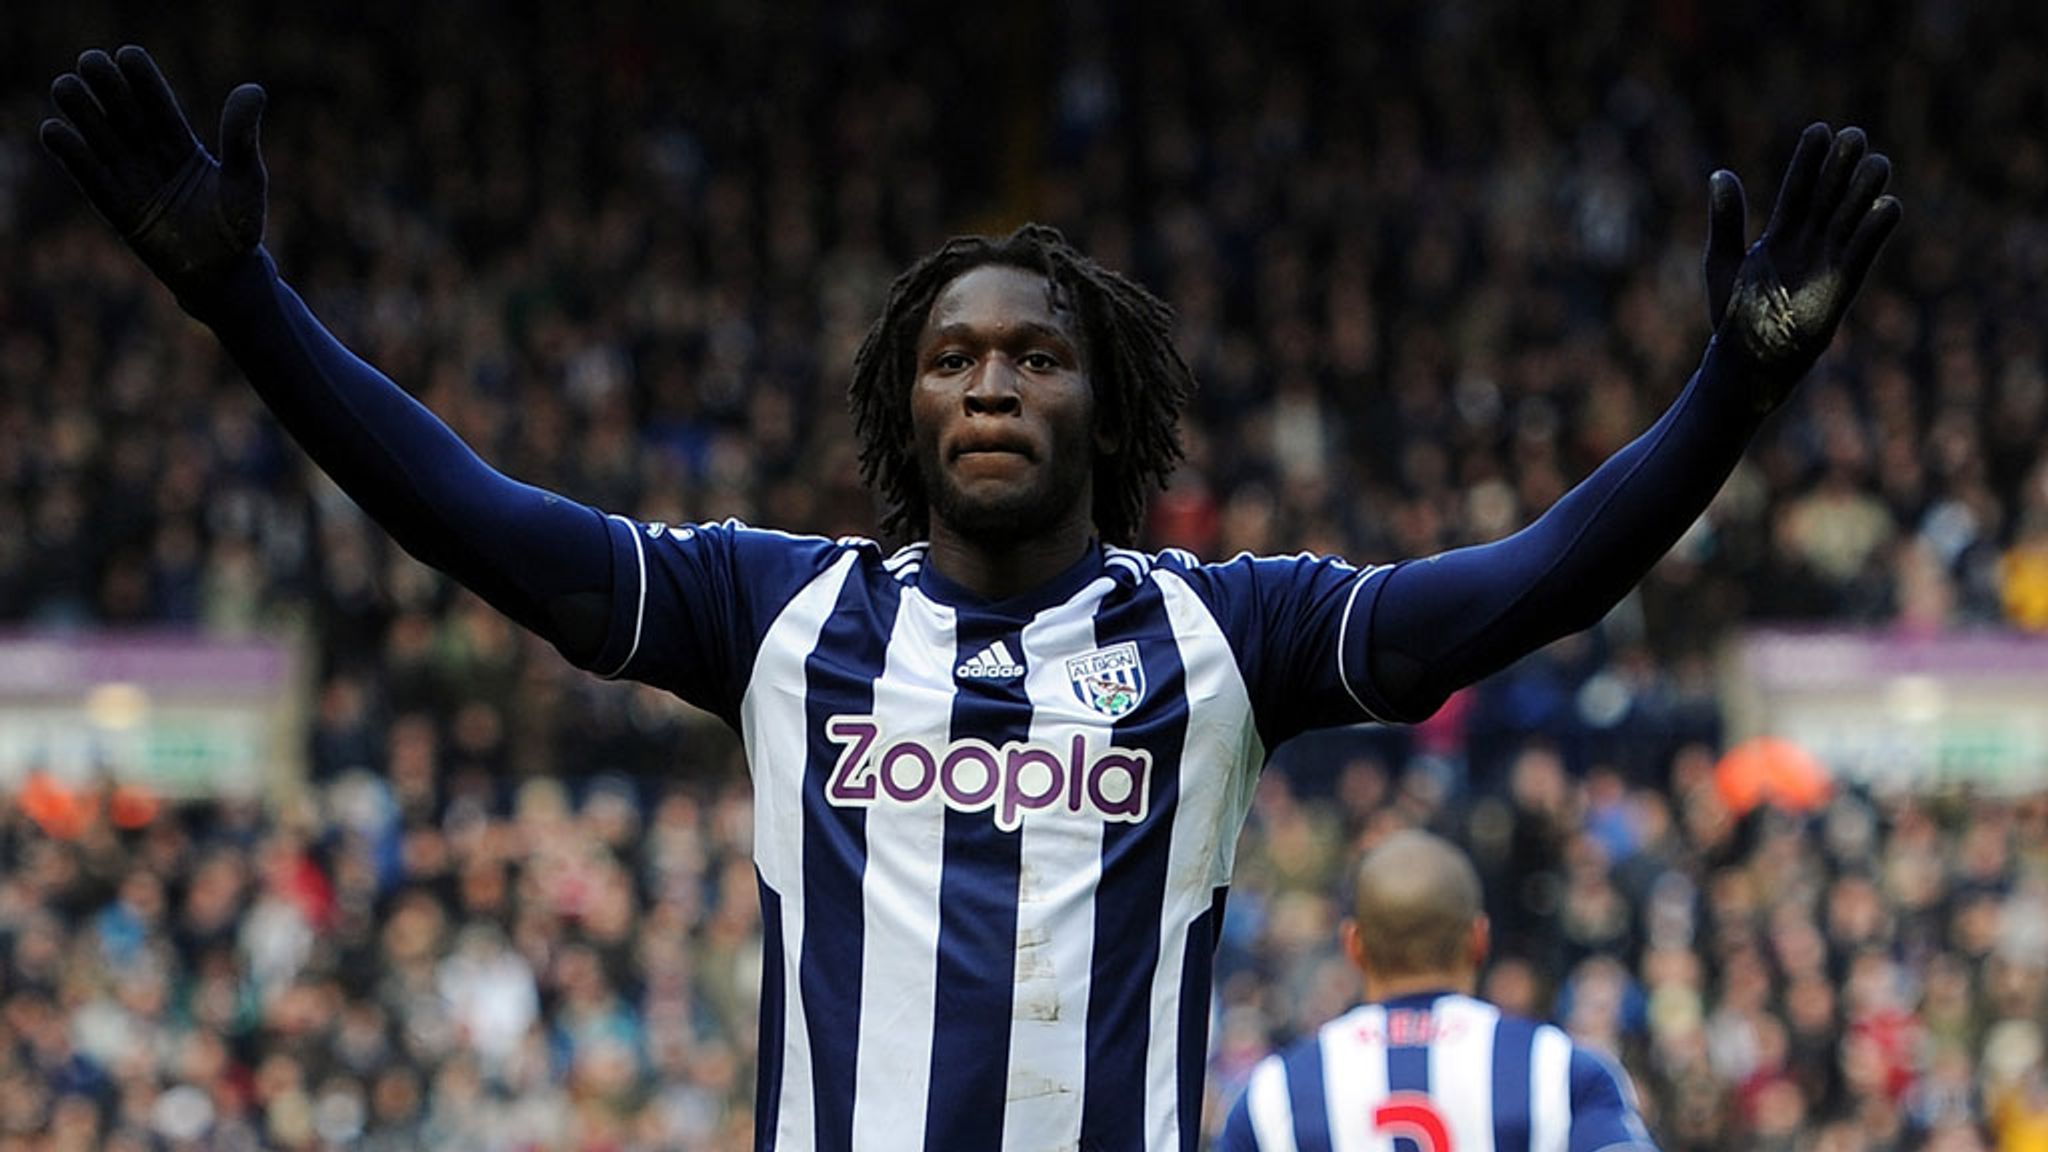 Two goals from Romelu Lukaku gave West Brom a 2-1 victory over Sunderland | Football News | Sky Sports